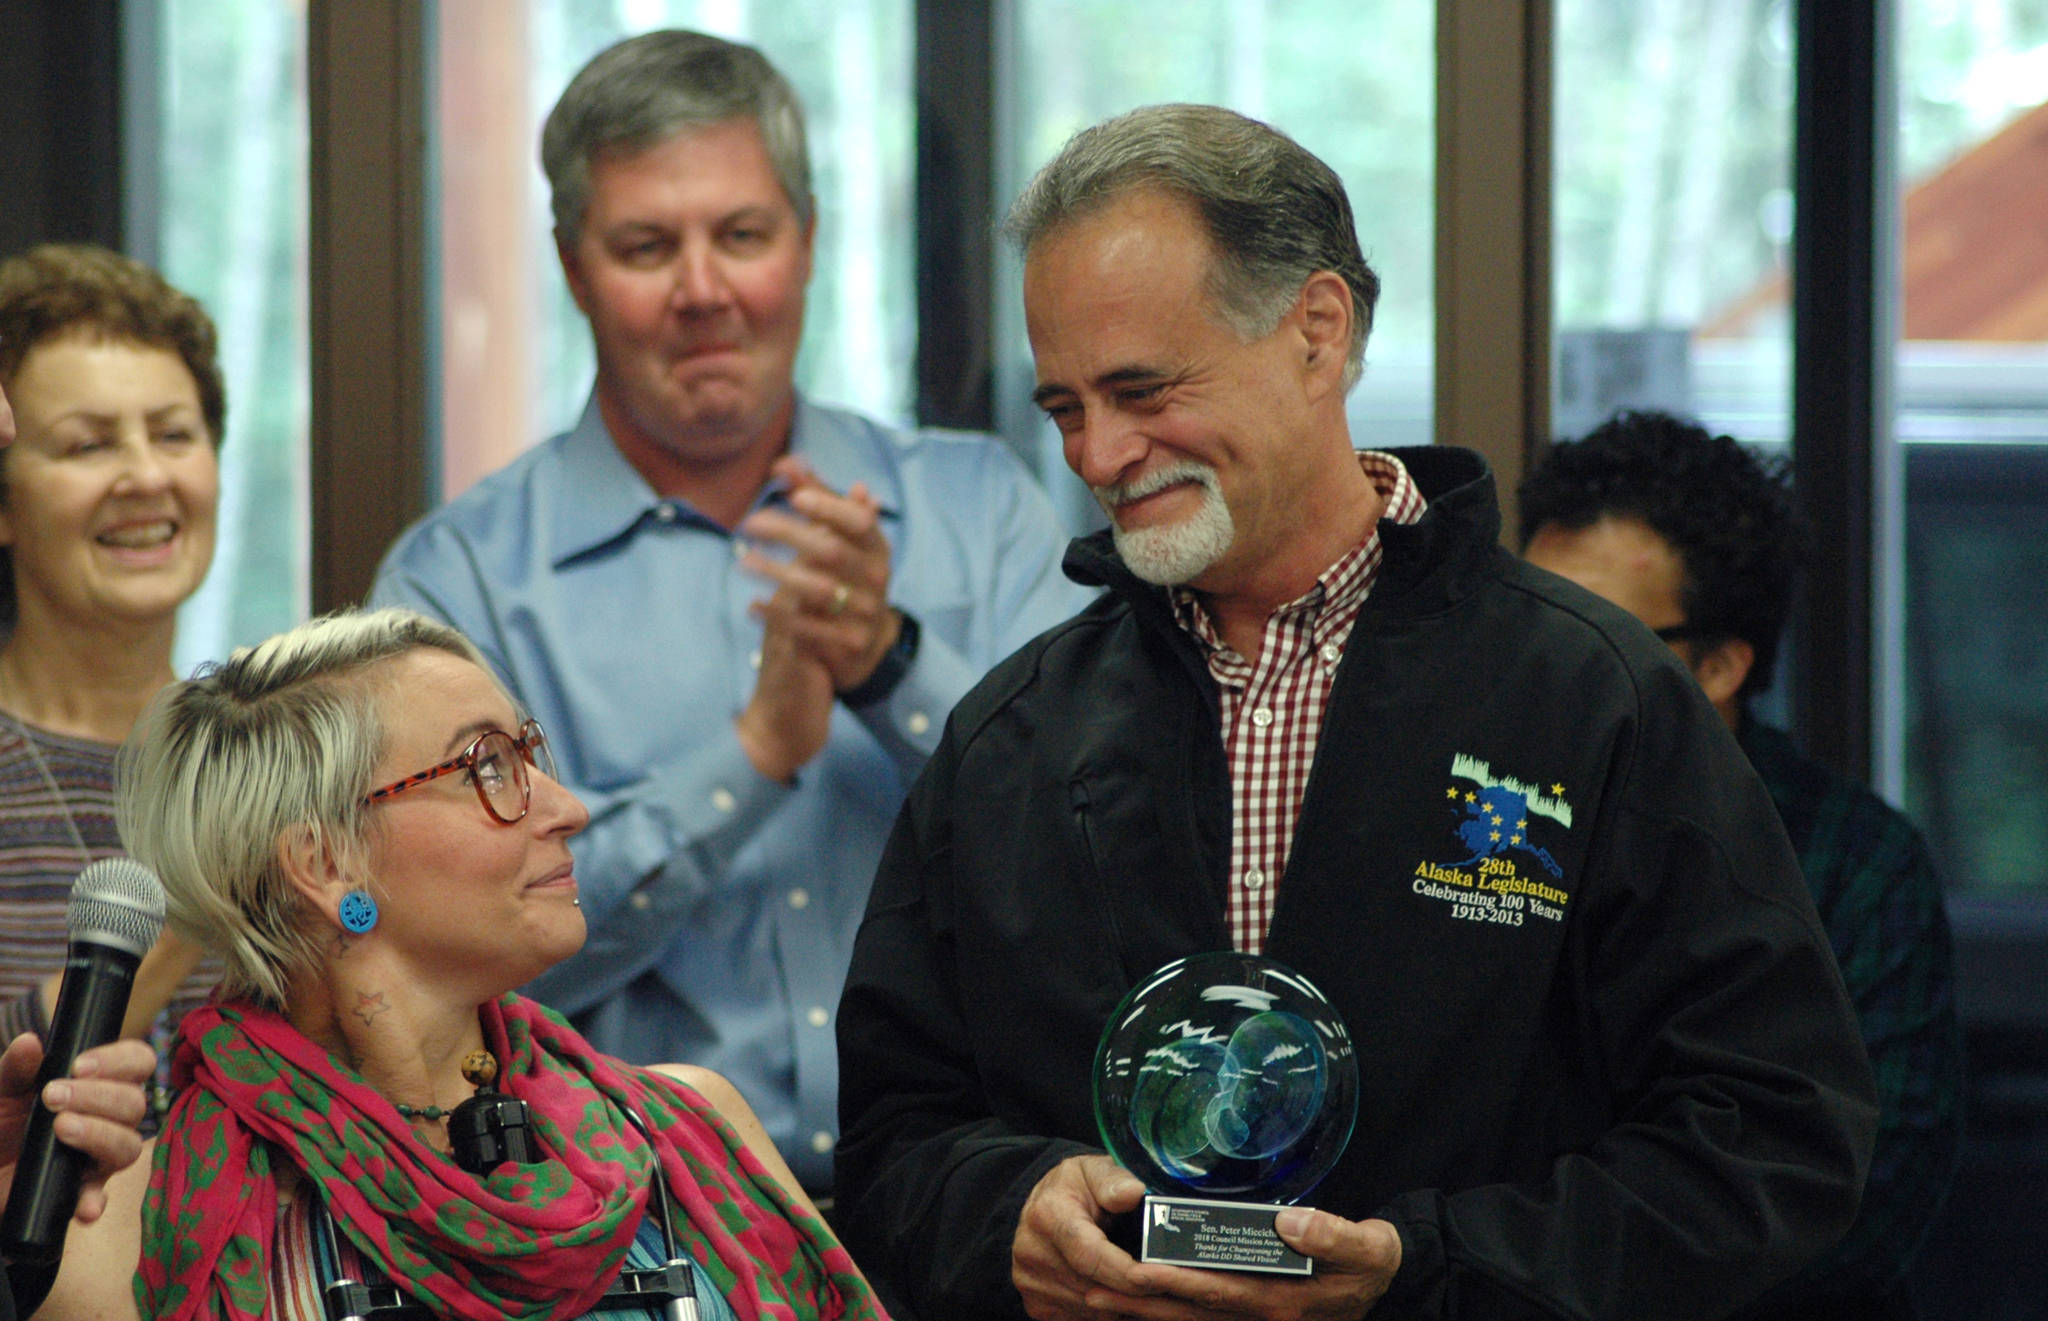 Sen. Peter Micciche, R-Soldotna (right) thanks Maggie Winston, the chair of the Governor’s Council on Disabilities and Special Education, for an award the board presented to him for his work on Senate Bill 174 during a signing ceremony for the bill at Hope Community Resources’ building on Saturday, Aug. 25, 2018 in Soldotna, Alaska. (Photo by Elizabeth Earl/Peninsula Clarion)